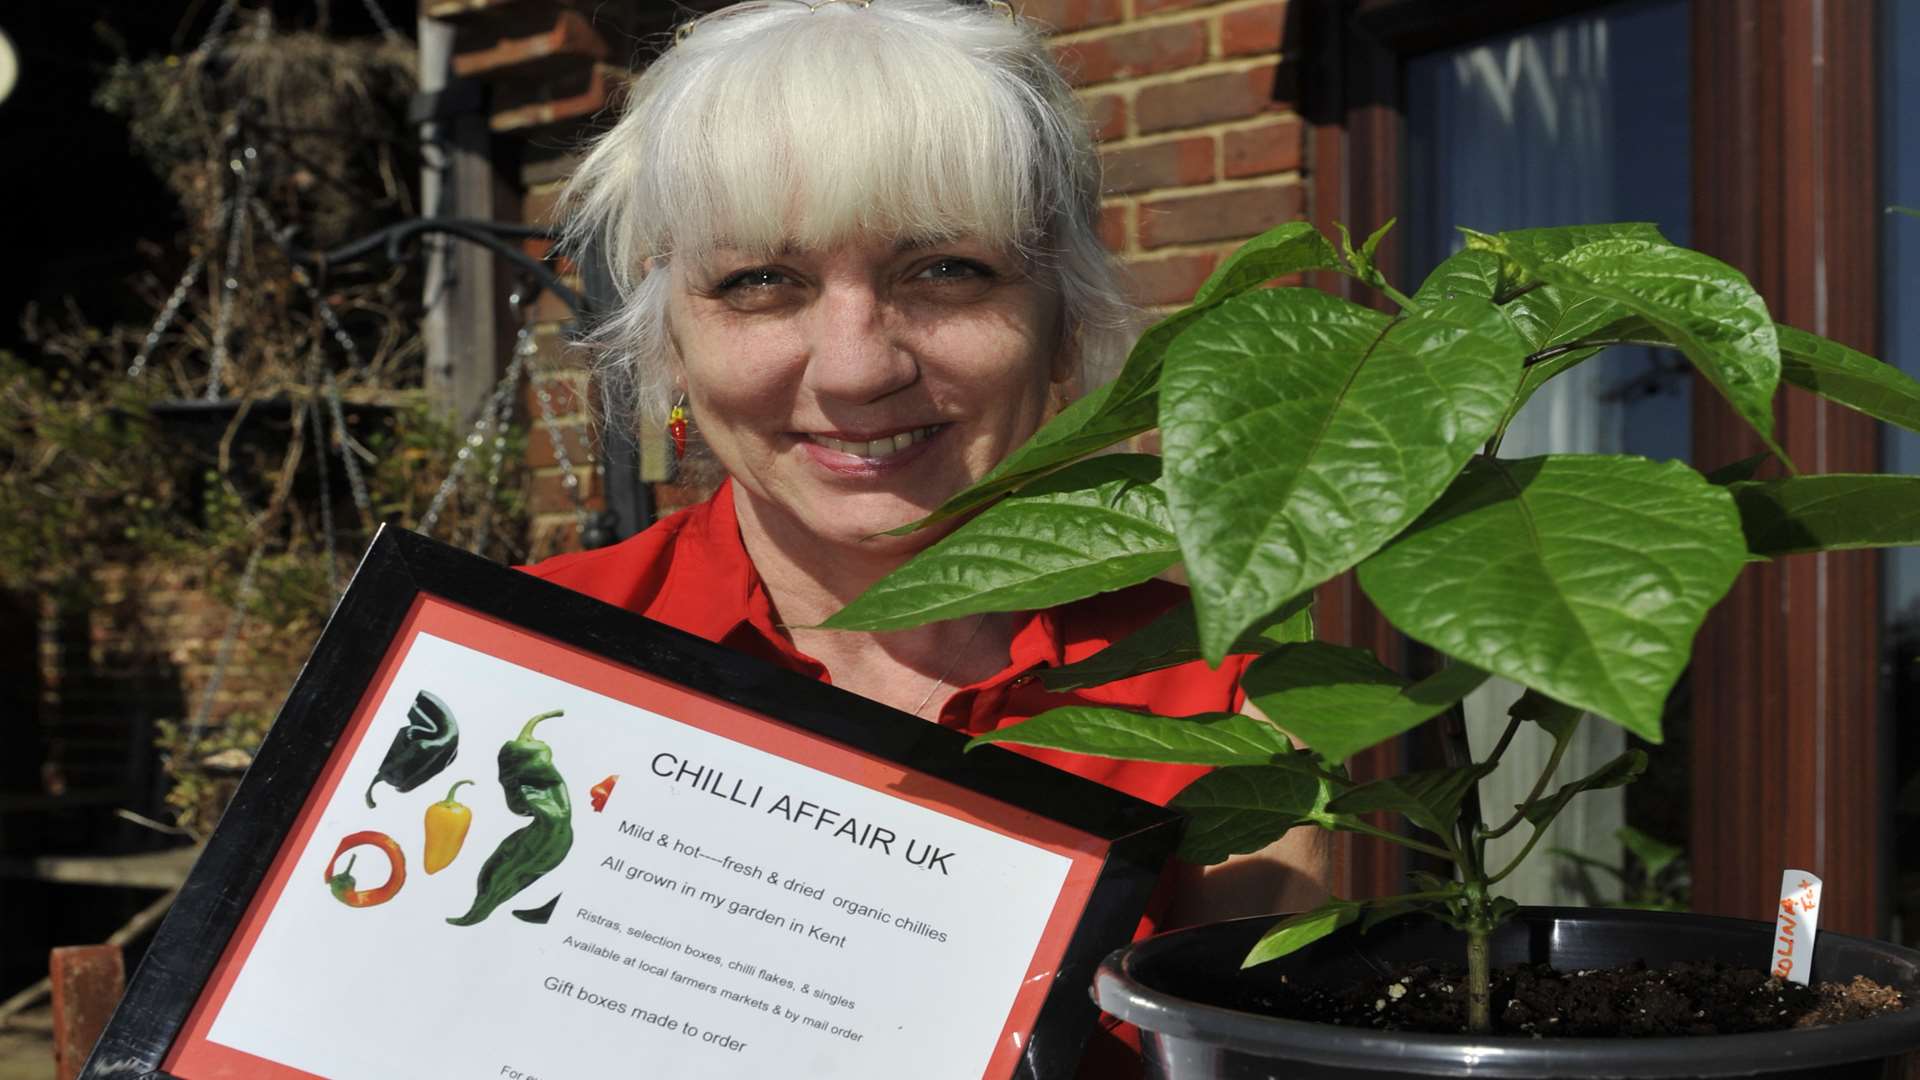 Pandora Martin grows her fresh chillies from home